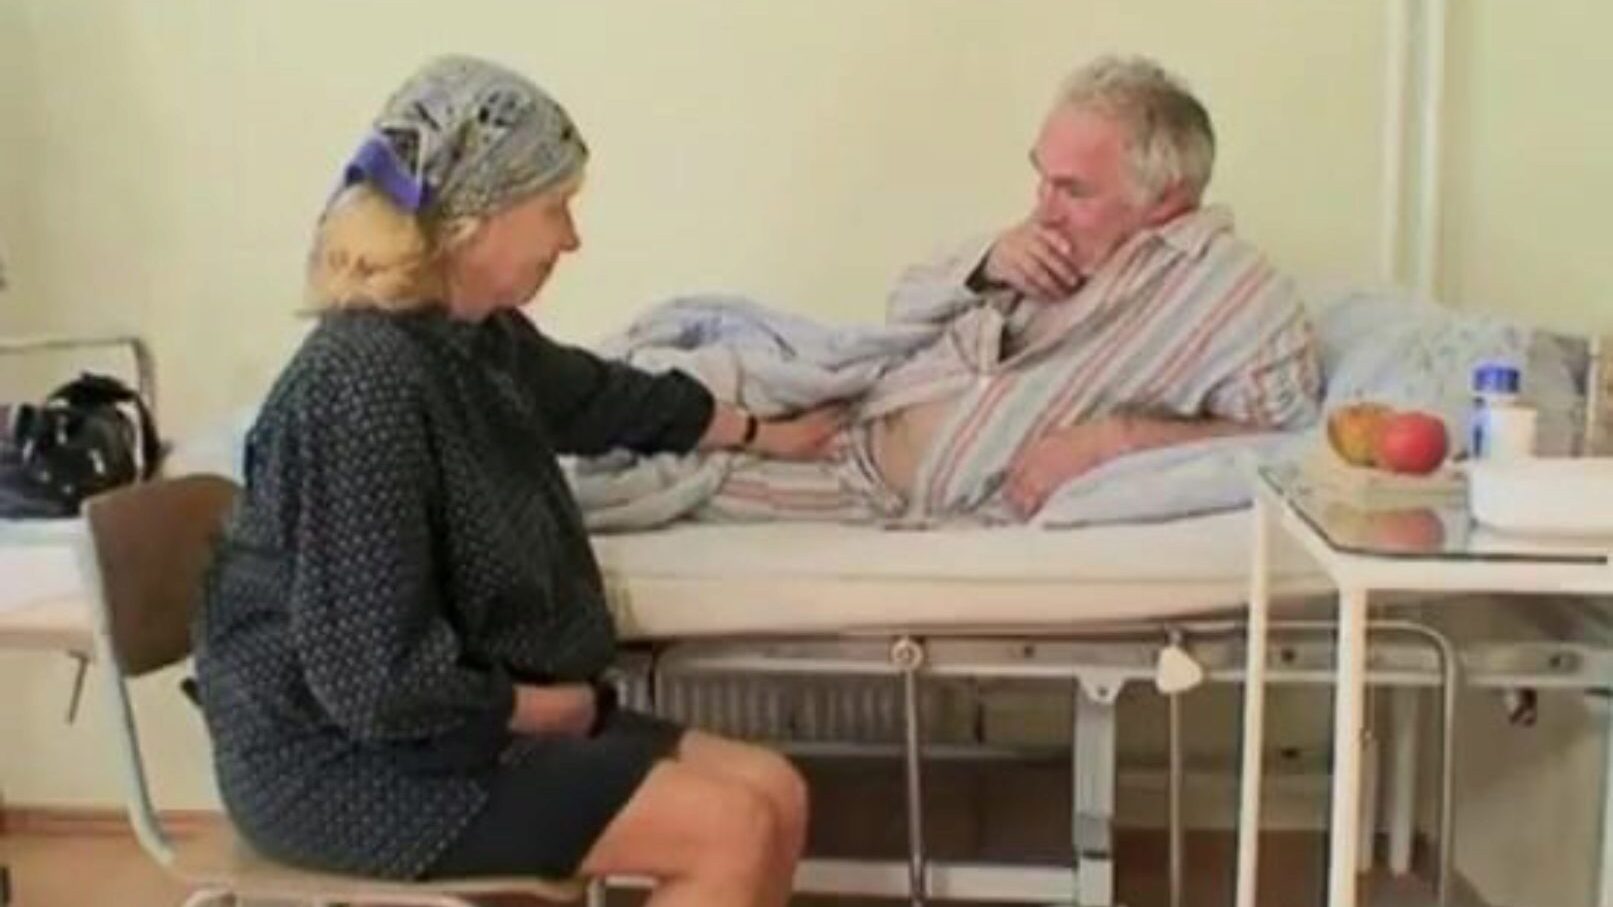 Naughty Hot Nurse Helps Old Patient To Get Laid